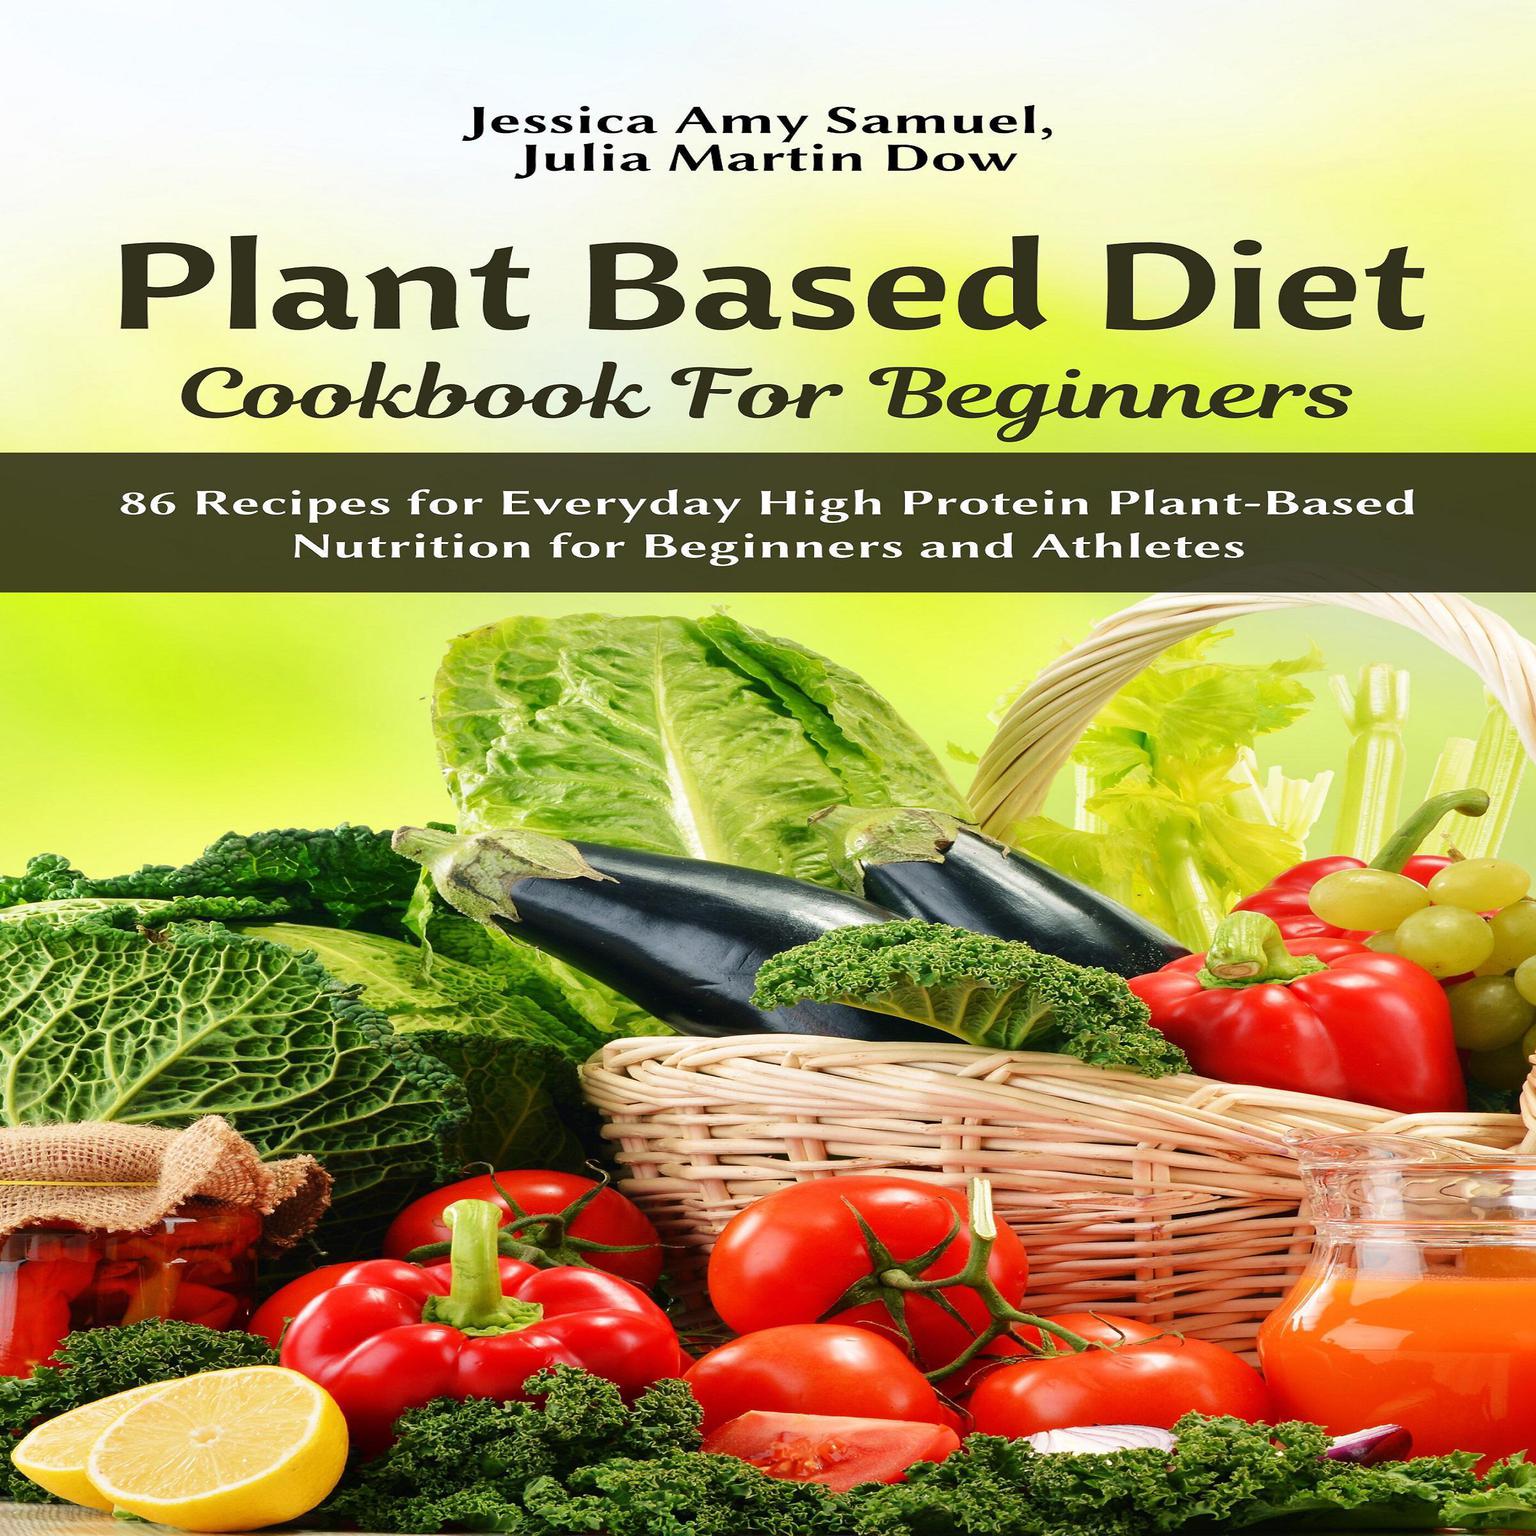 Plant Based Diet Cookbook for Beginners: 86 Recipes for Everyday High Protein Plant-Based Nutrition for Beginners and Athletes Audiobook, by Jessica Amy Samuel